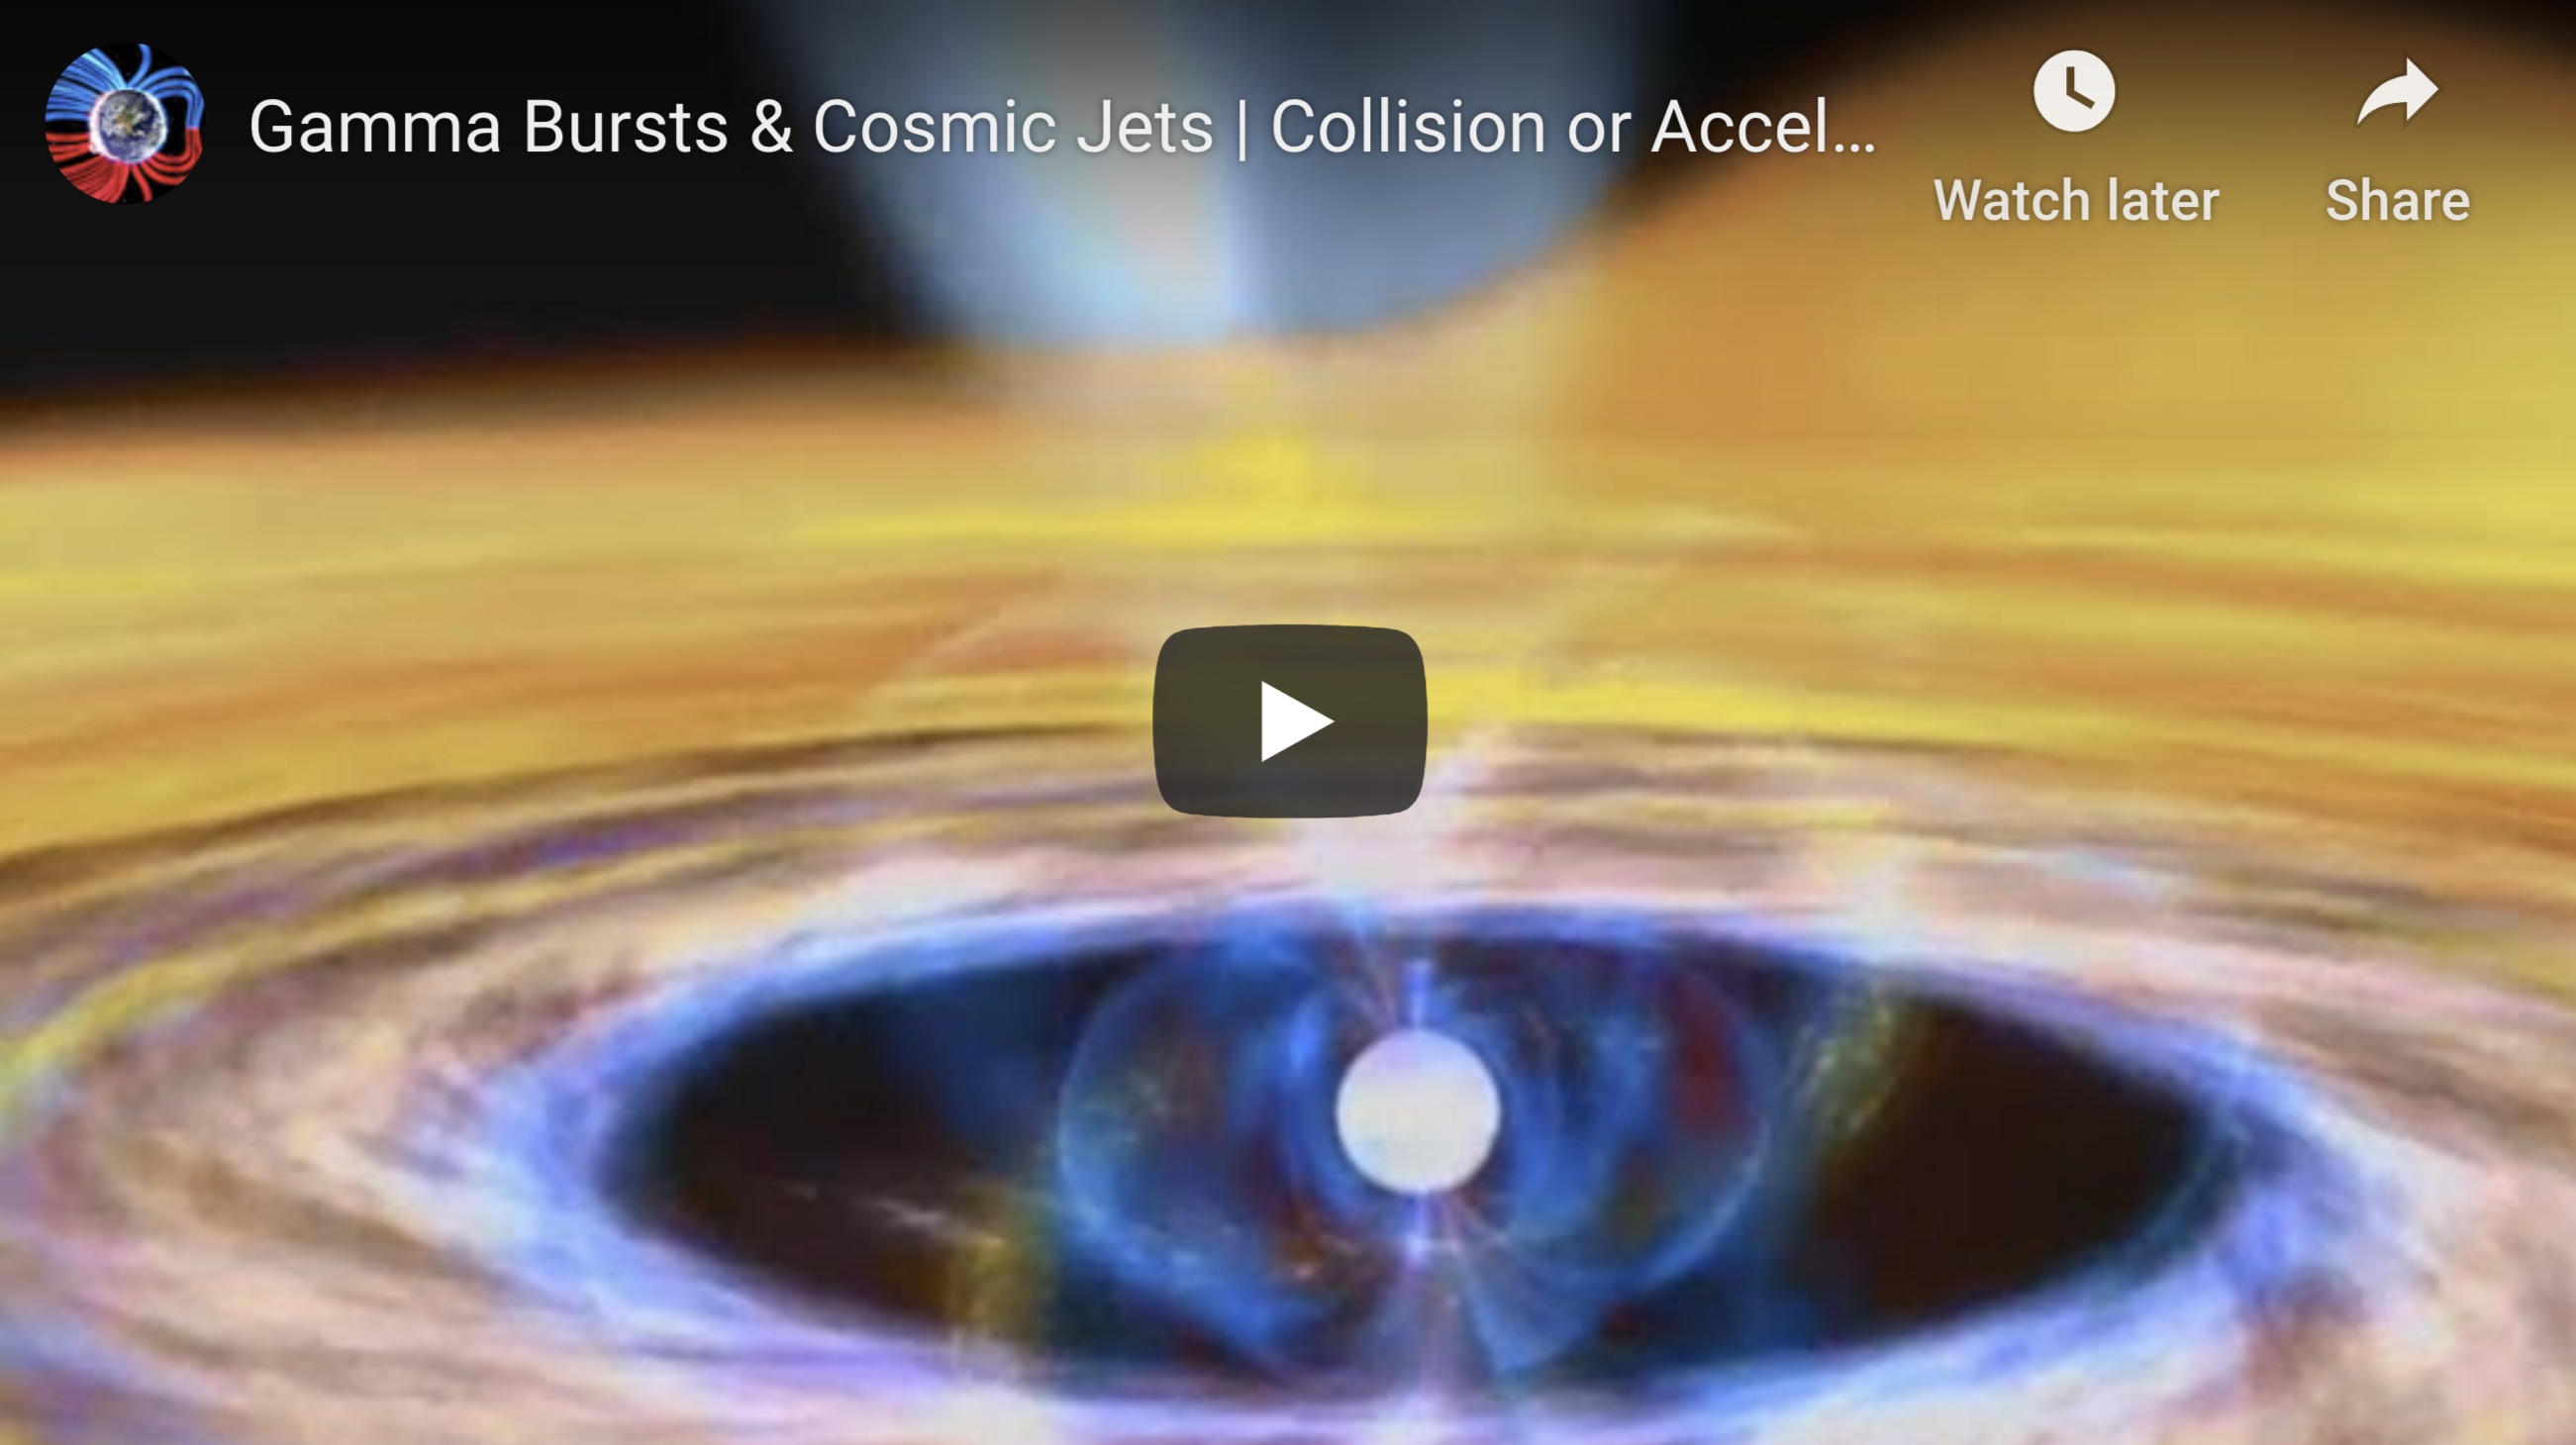 Gamma Bursts & Cosmic Jets Collision or Acceleration 4 8 2020